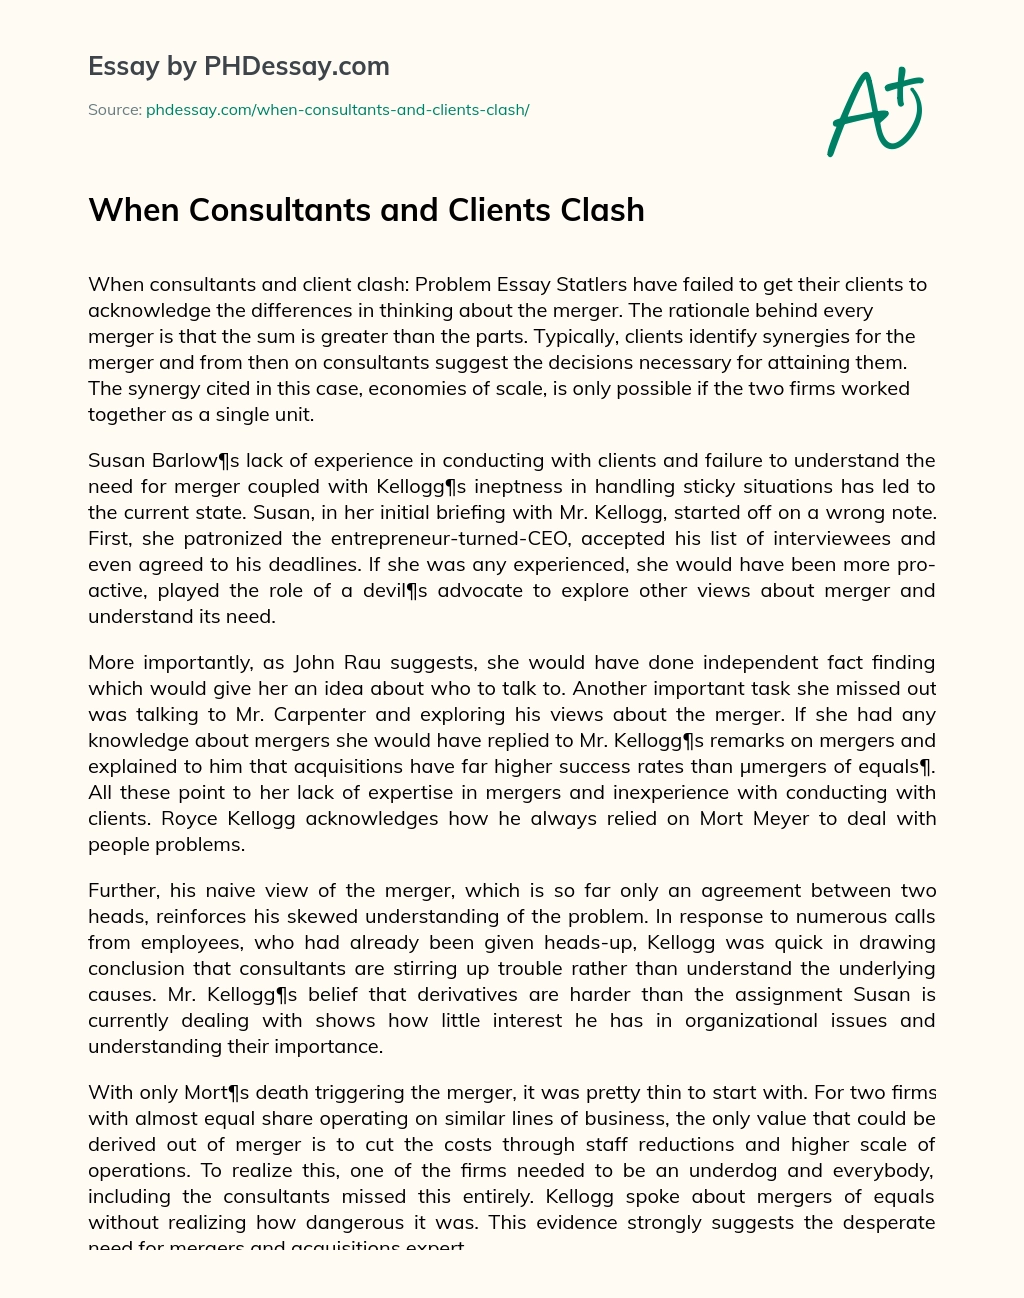 When Consultants and Clients Clash essay